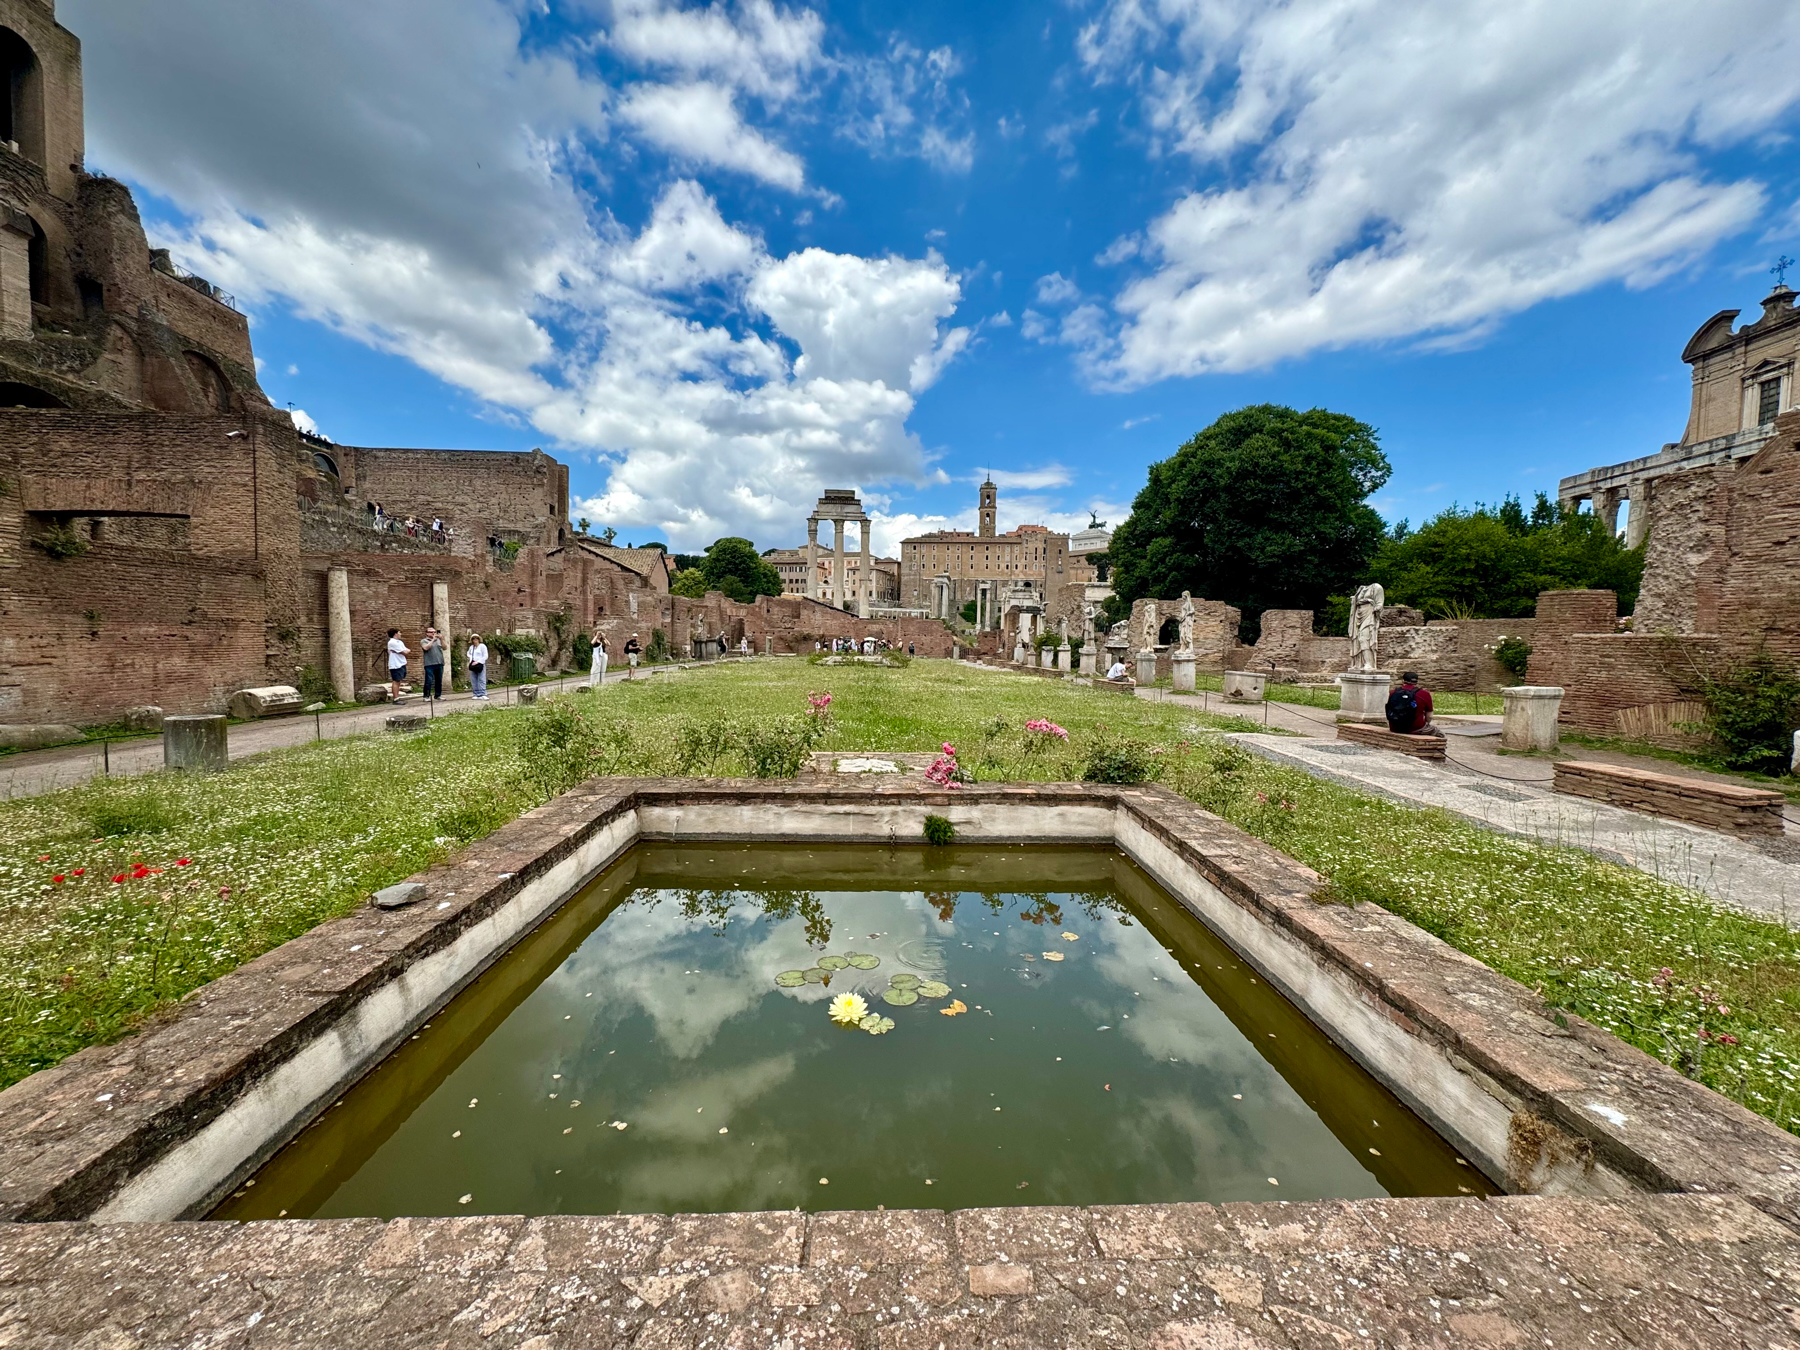 Ancient Roman ruins under a partly cloudy sky. A rectangular reflective pool with water lilies is in the foreground, and scattered statues and grassy areas are visible. People are walking and observing the ruins. Tall stone structures stand in the distance, surrounded by lush, green grass.